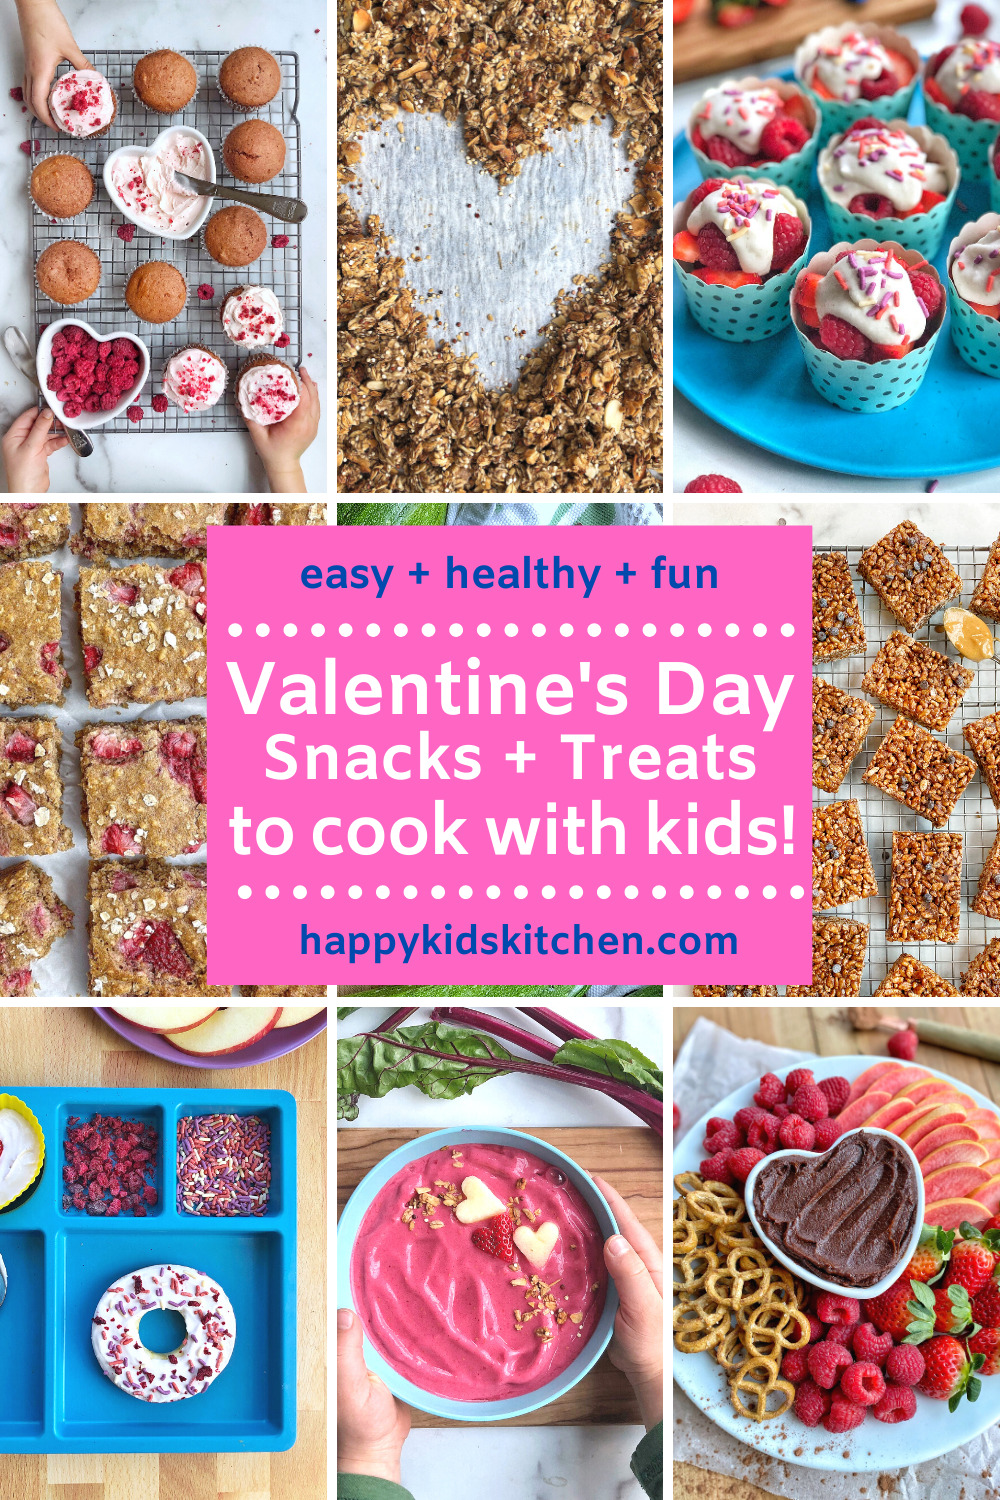 18 No Bake Valentine's Day Recipes for kids - Lifestyle of a Foodie